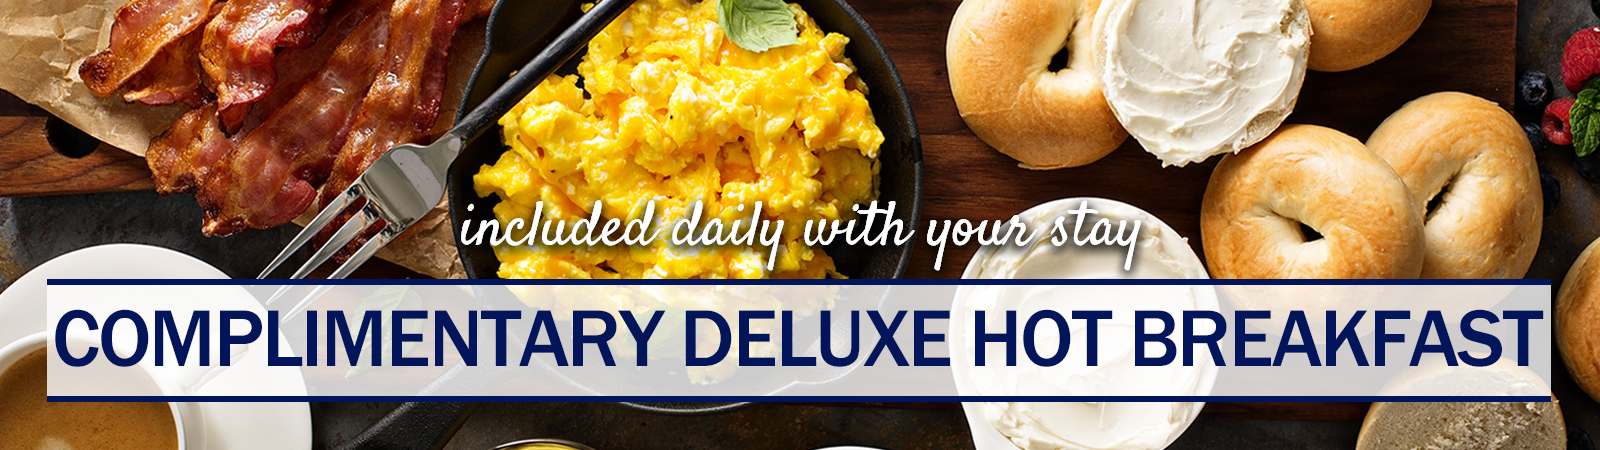 Complimentary Deluxe Hot Breakfast included daily with your stay